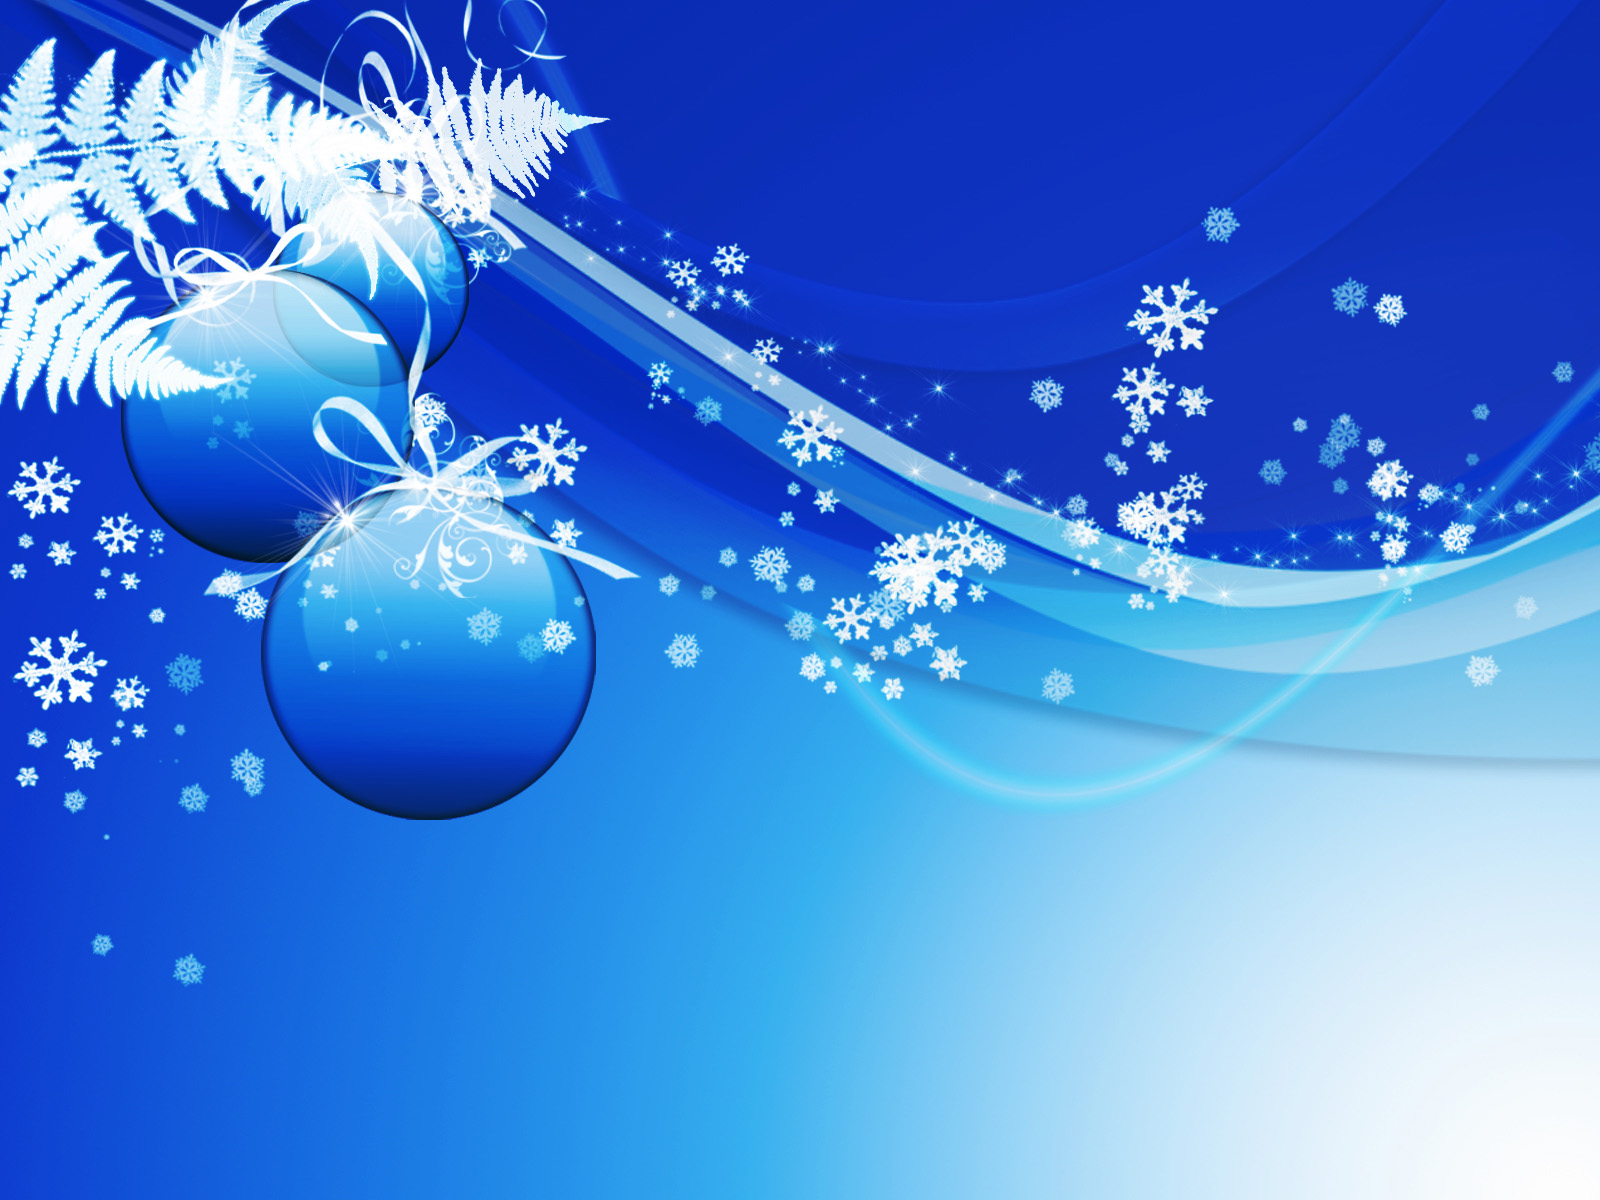 Best Christmas Wallpaper Sms In